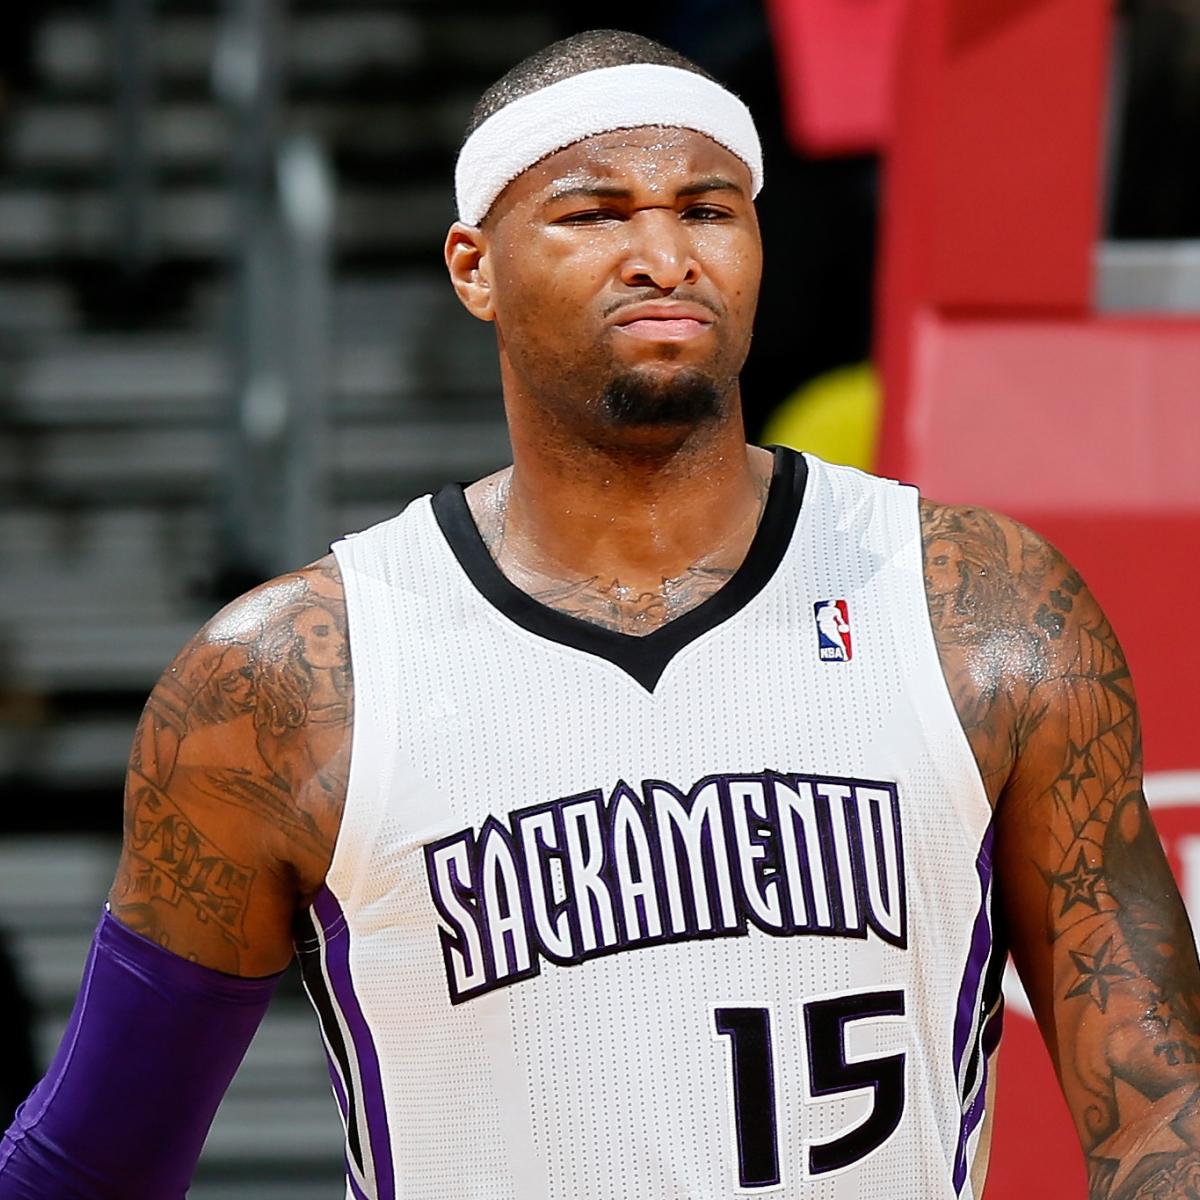 NBA Buzz - First look at DeMarcus Cousins putting in work